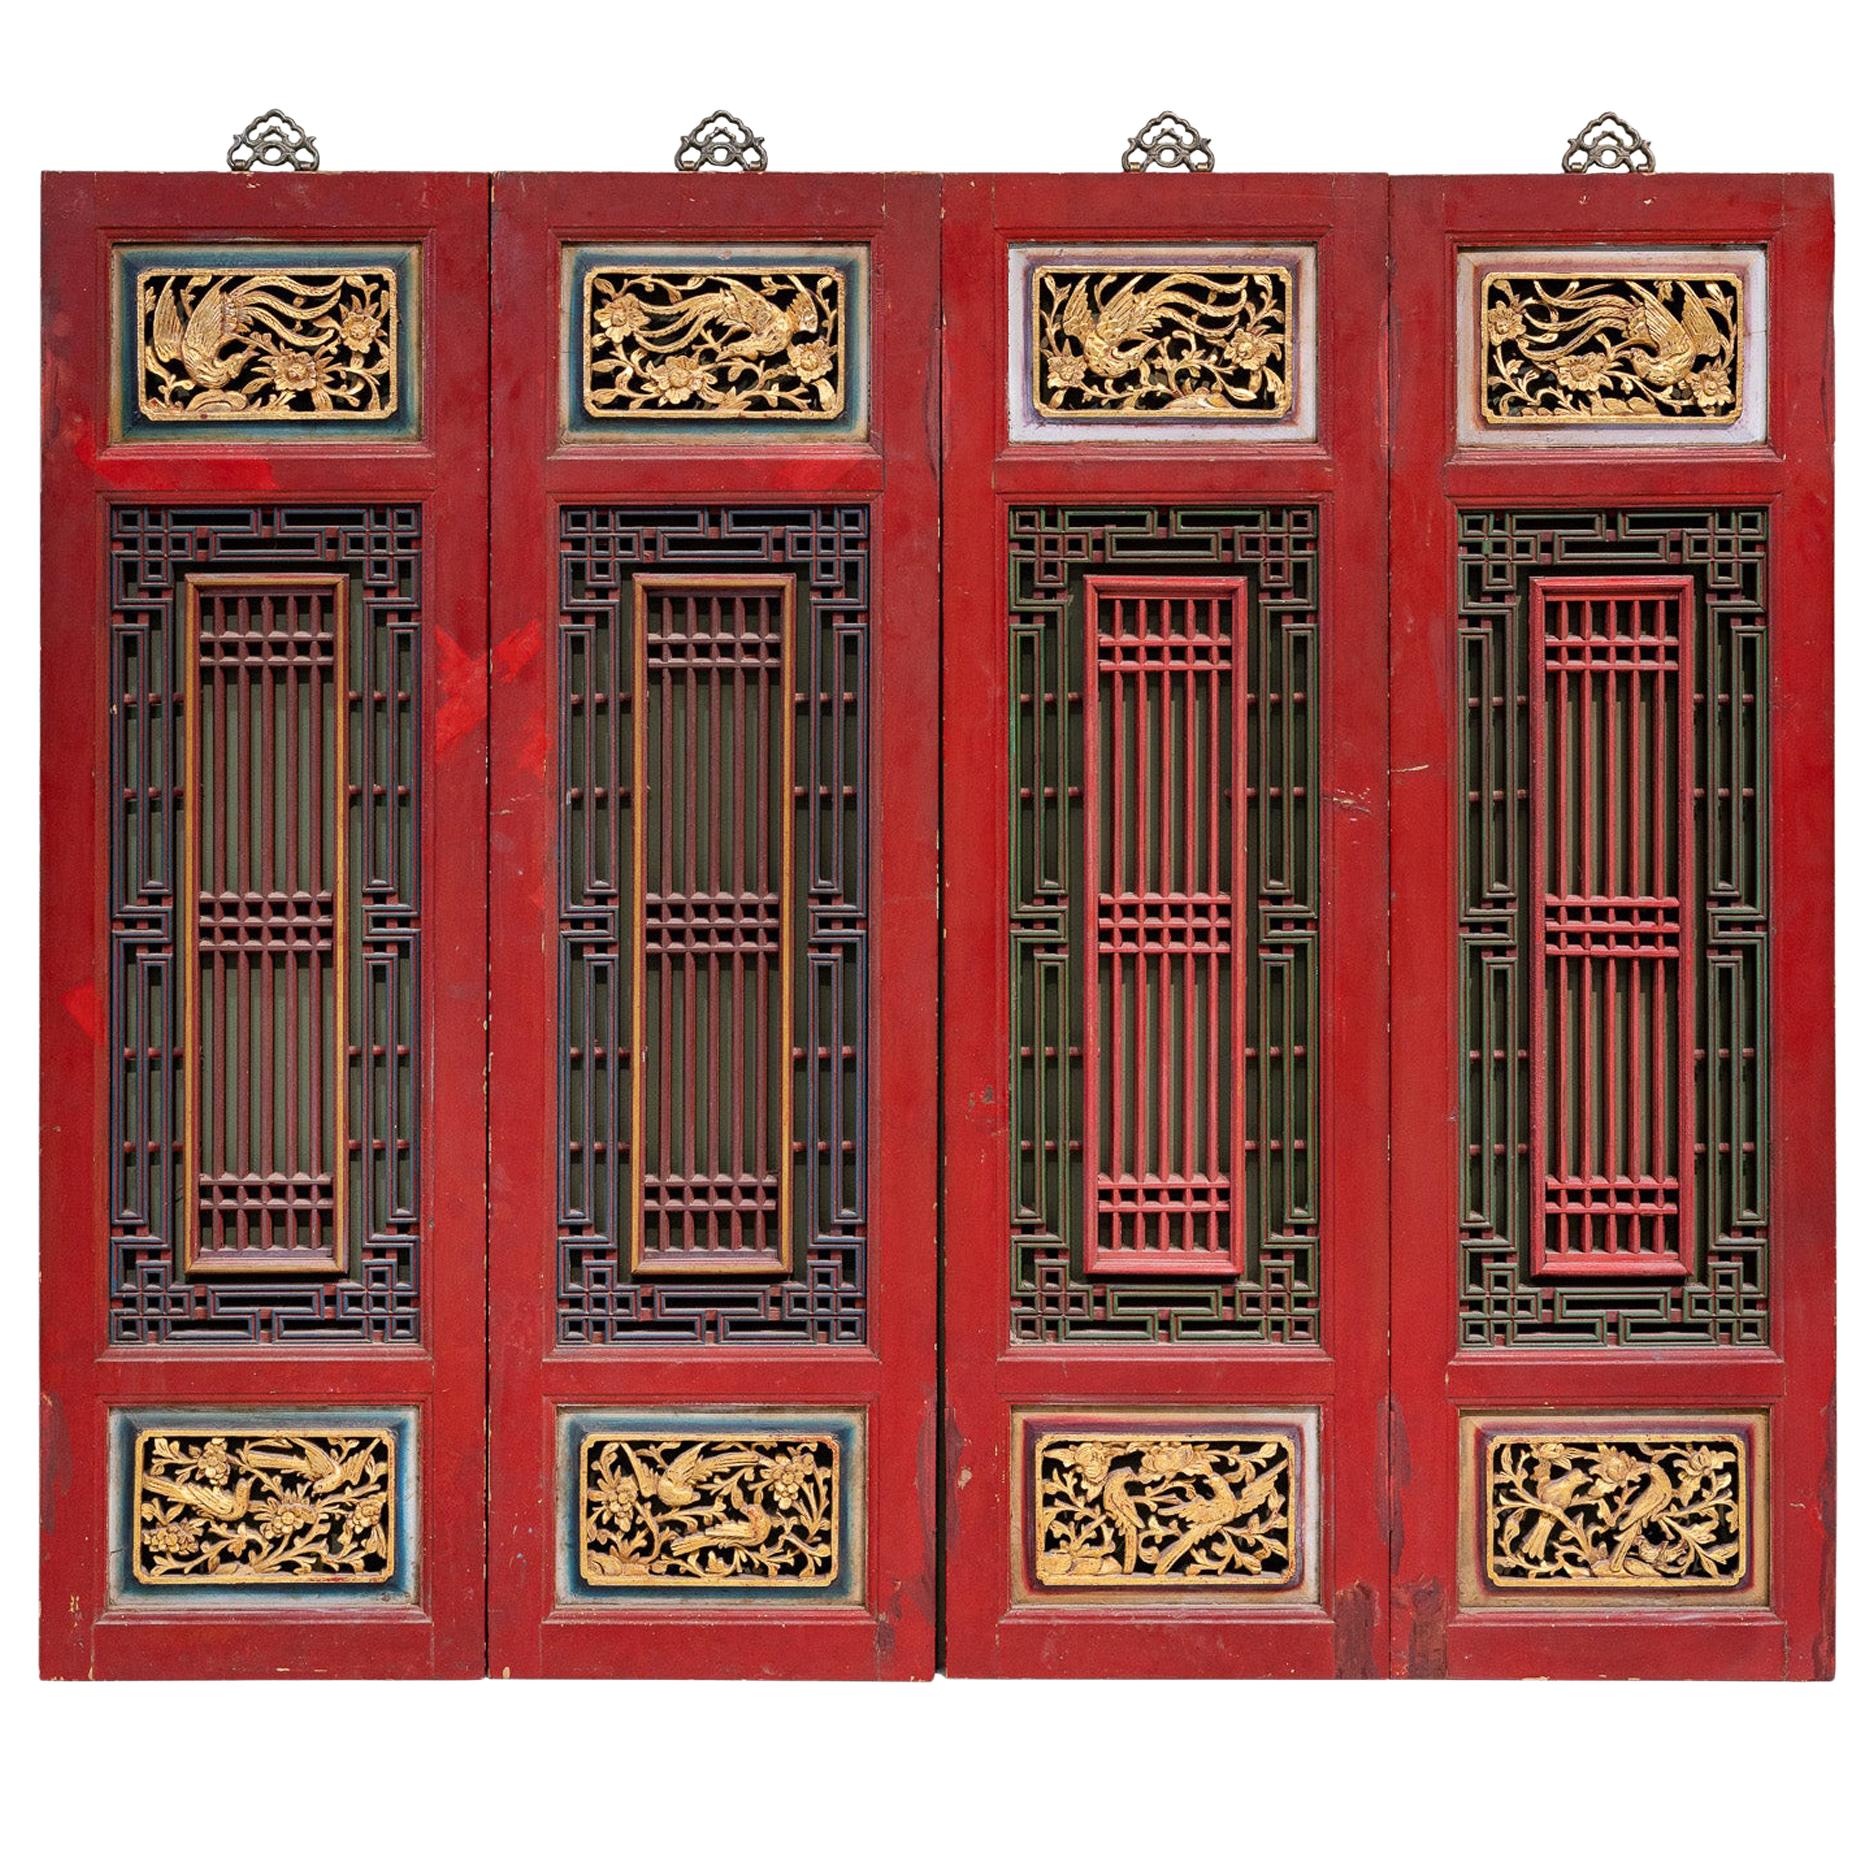 Early 20th Century Window Carvings from Fujian, China